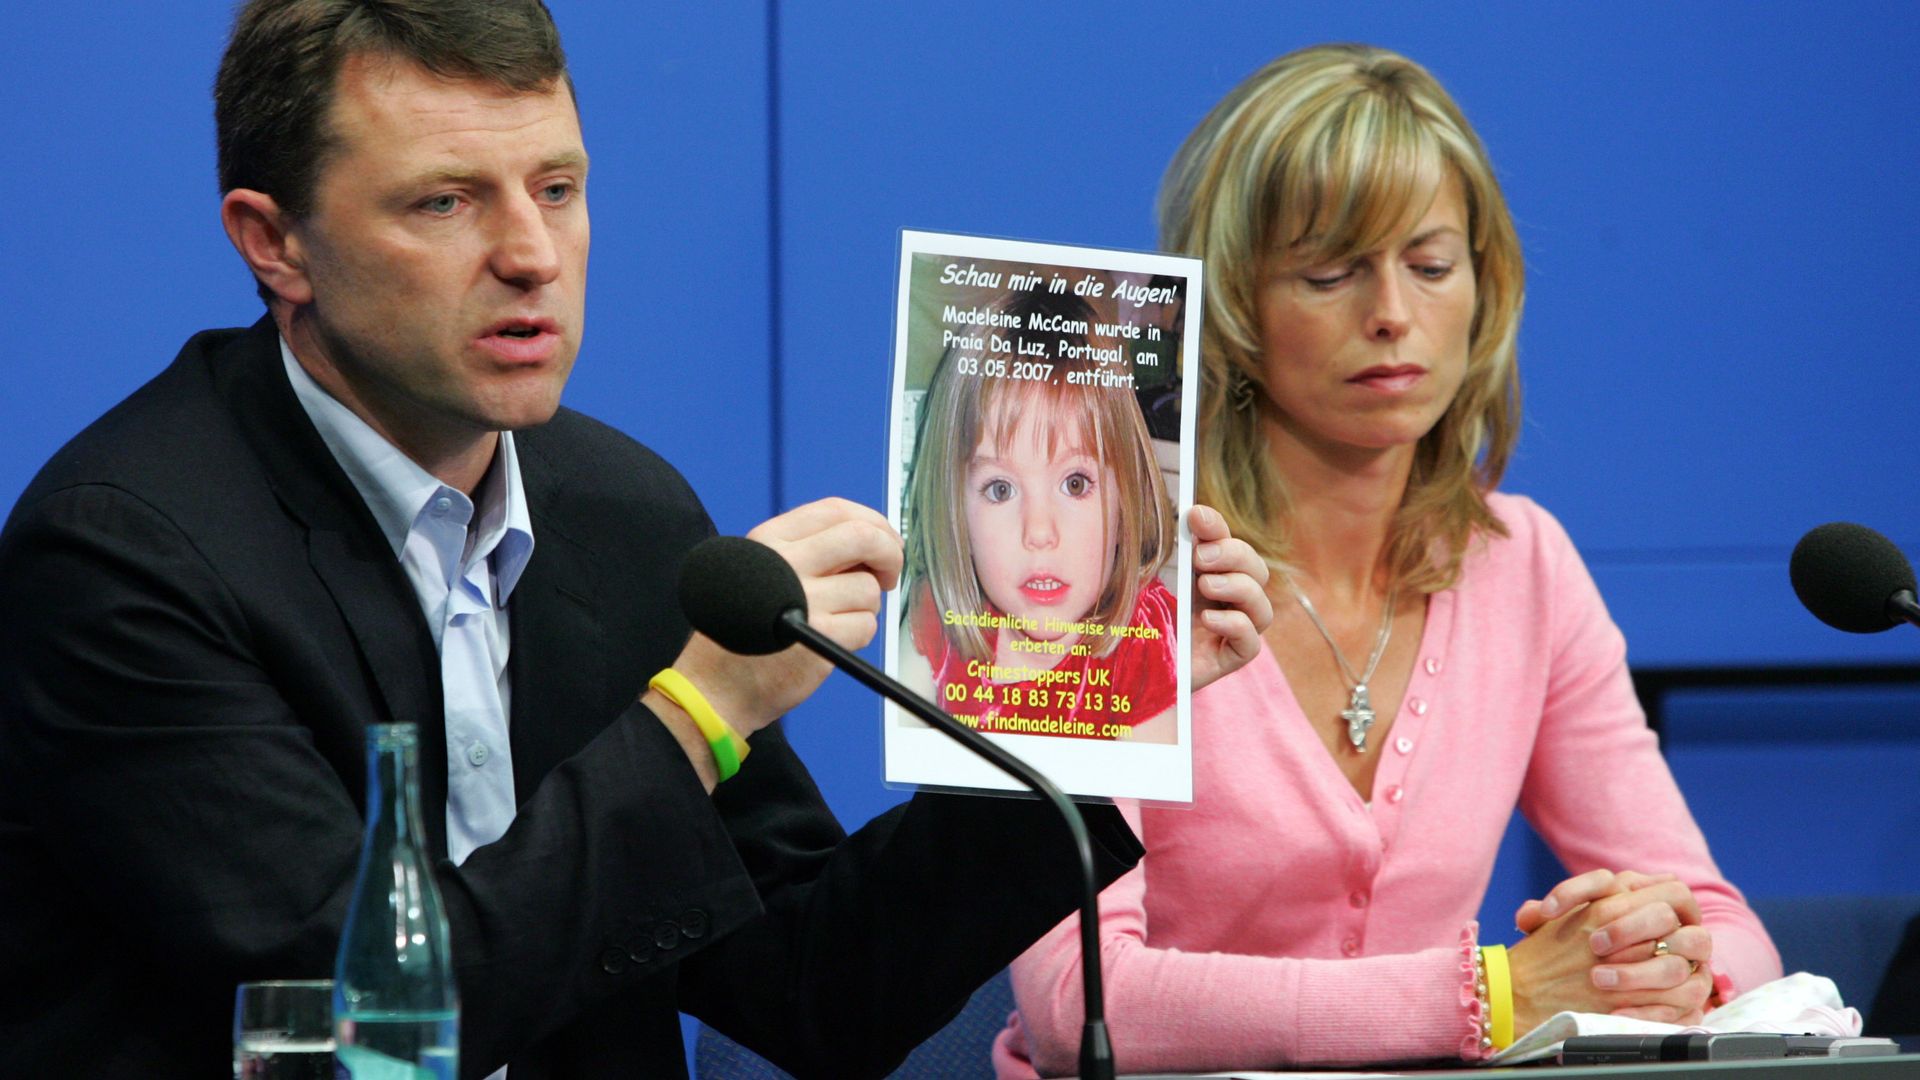 Kate and Gerry McCann hold up a picture of Madeleine during a press conference in 2007